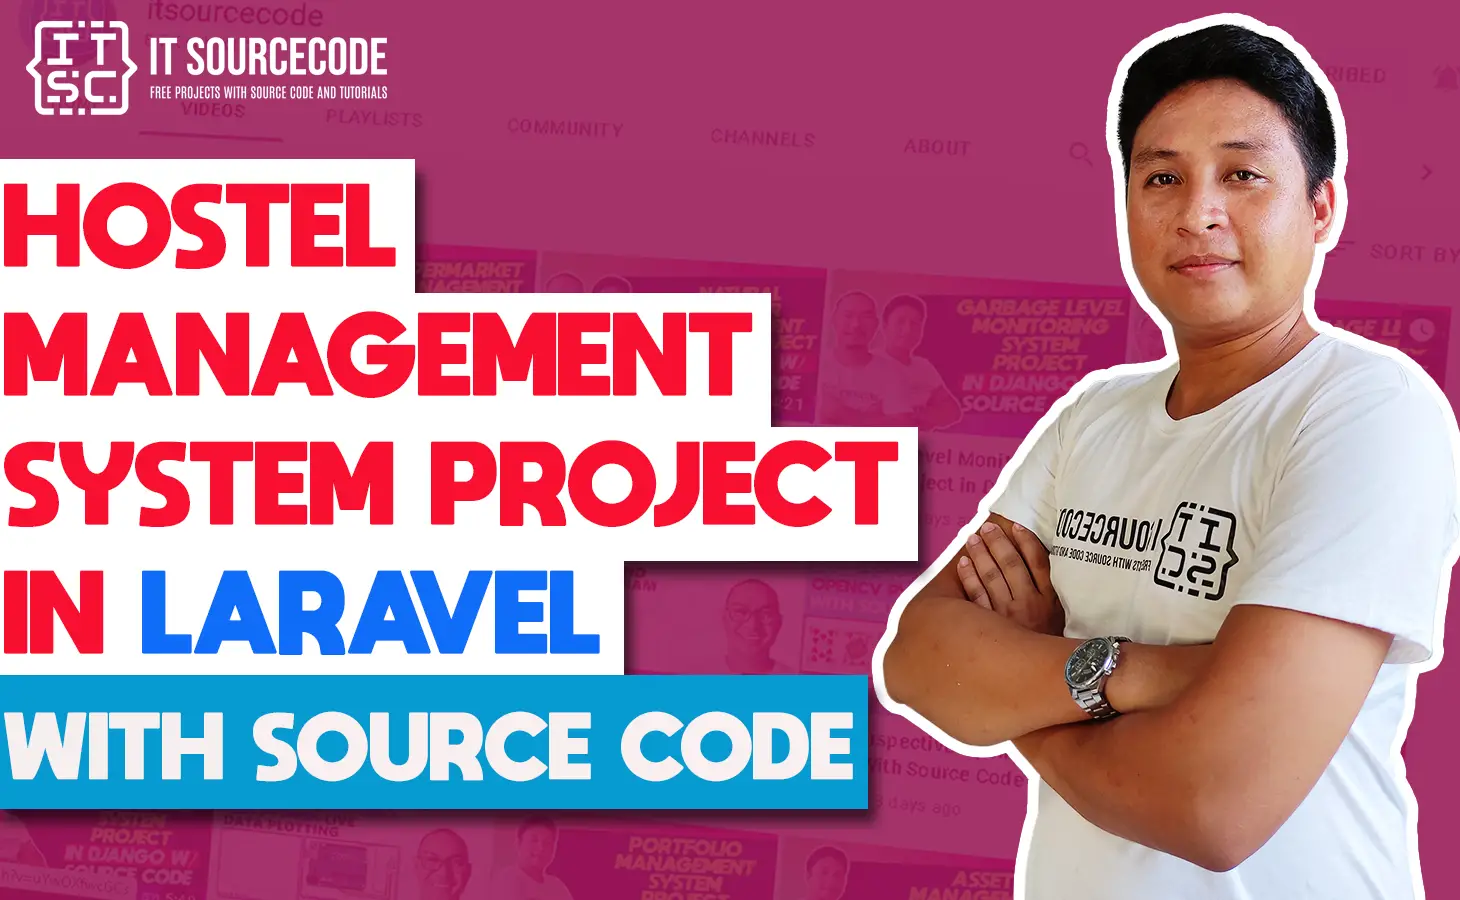 Hostel Management System Project in Laravel with Source Code